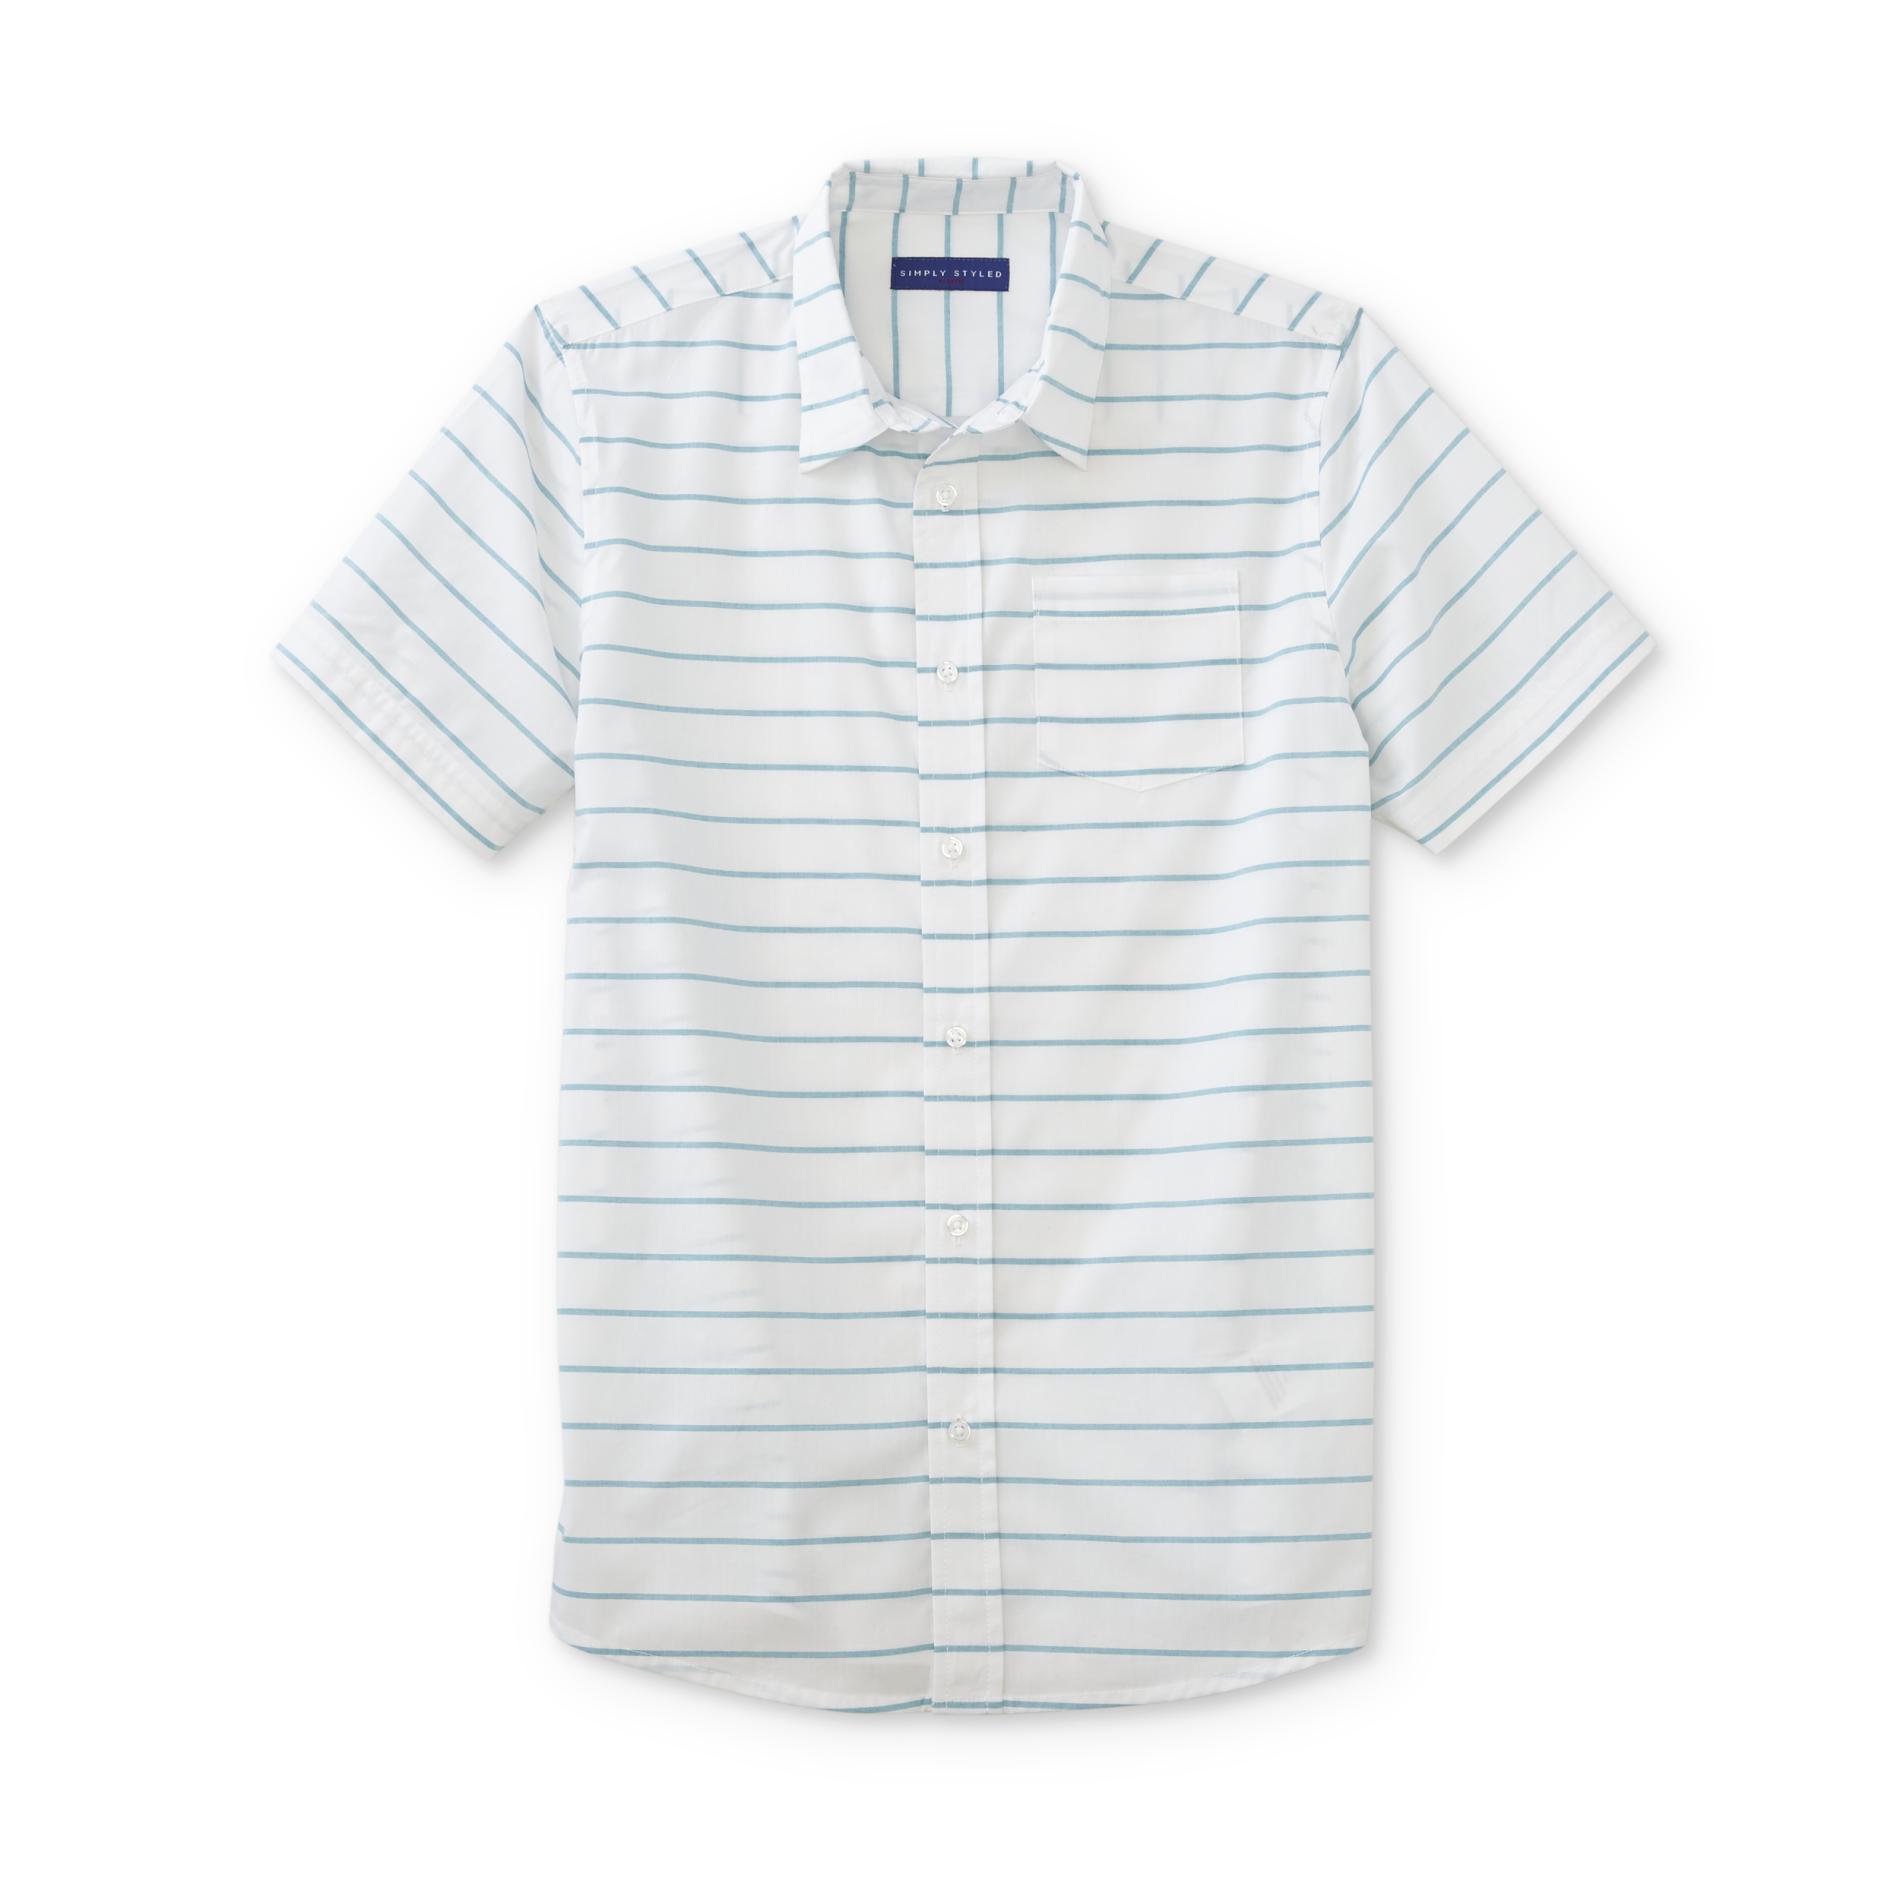 Simply Styled Boys' Button-Front Shirt - Striped